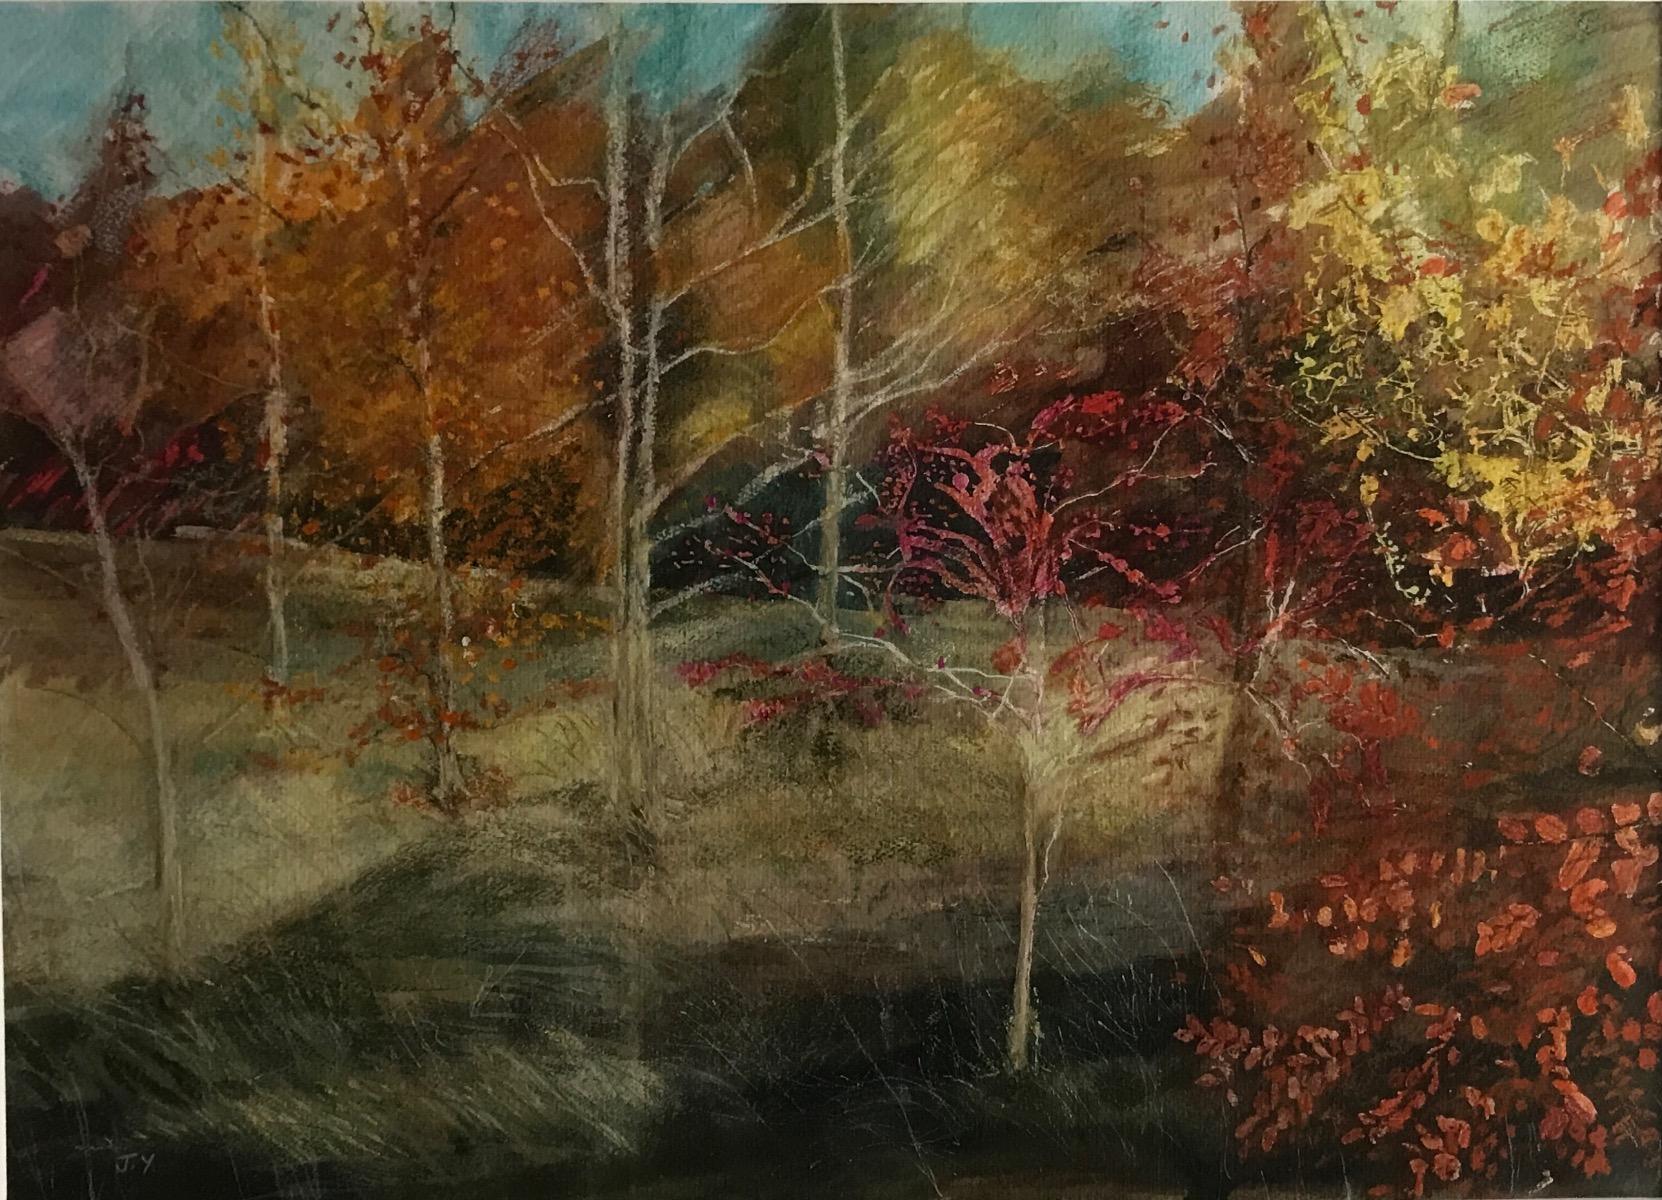 Glyme Lane - Millennium Wood, Chipping Norton by Judith Yarrow is a beautiful Autumn depiction of the glowing colours in a country meadow.  The vibrant reds, oranges and yellows contrast against the yellowish, green course grass.

ADDITIONAL